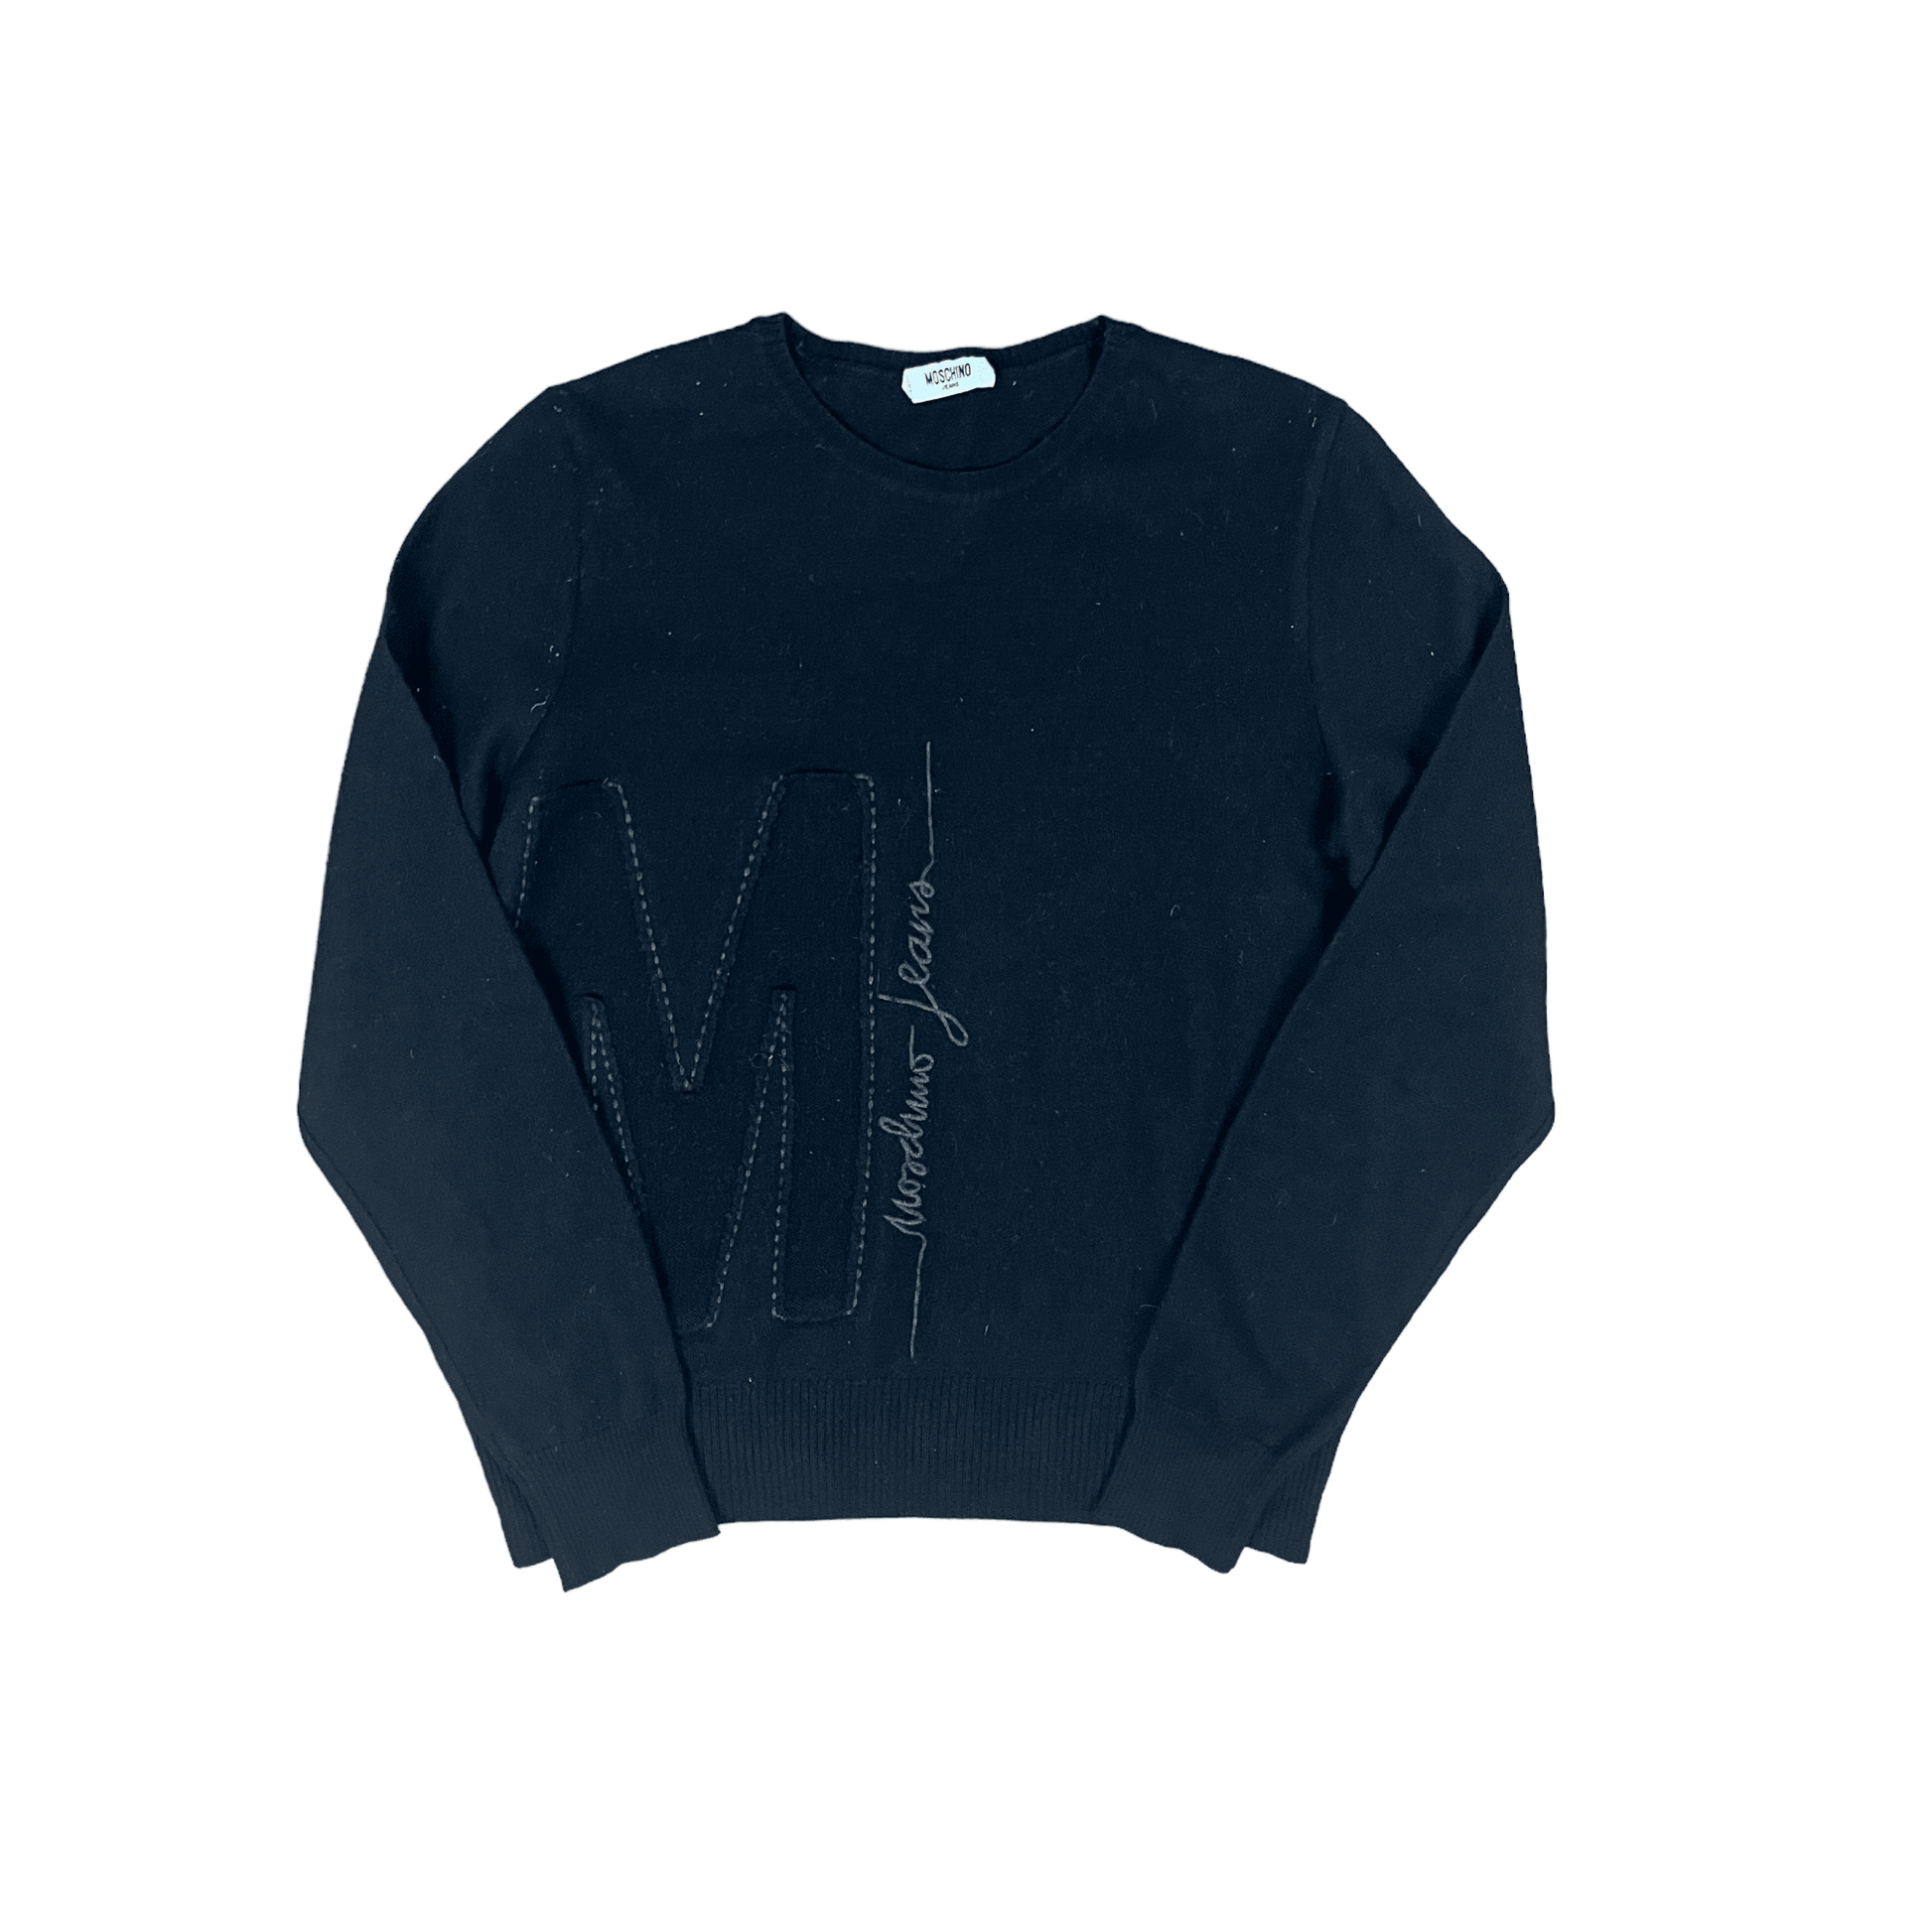 Vintage 90s Black Moschino Jeans Spell-Out Knitted Sweatshirt - Small - The Streetwear Studio